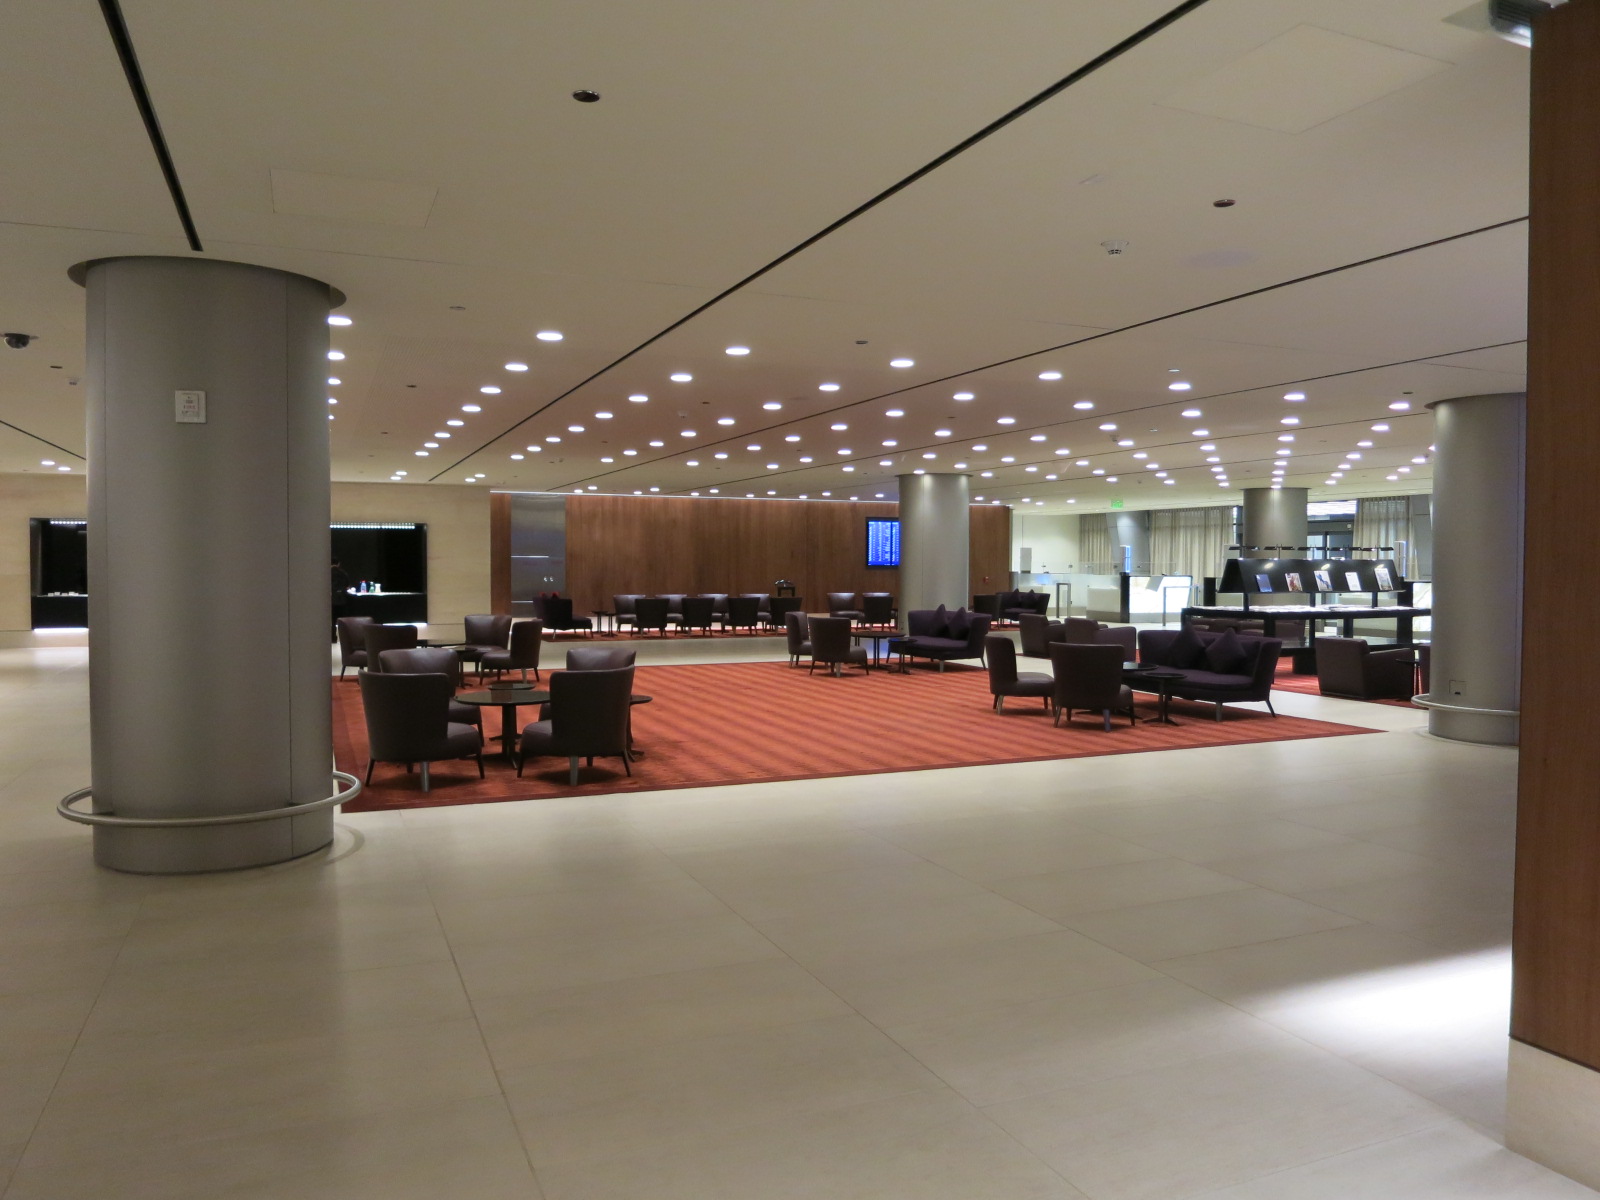 Qatar Airways A380 first class Doha immigration lounge